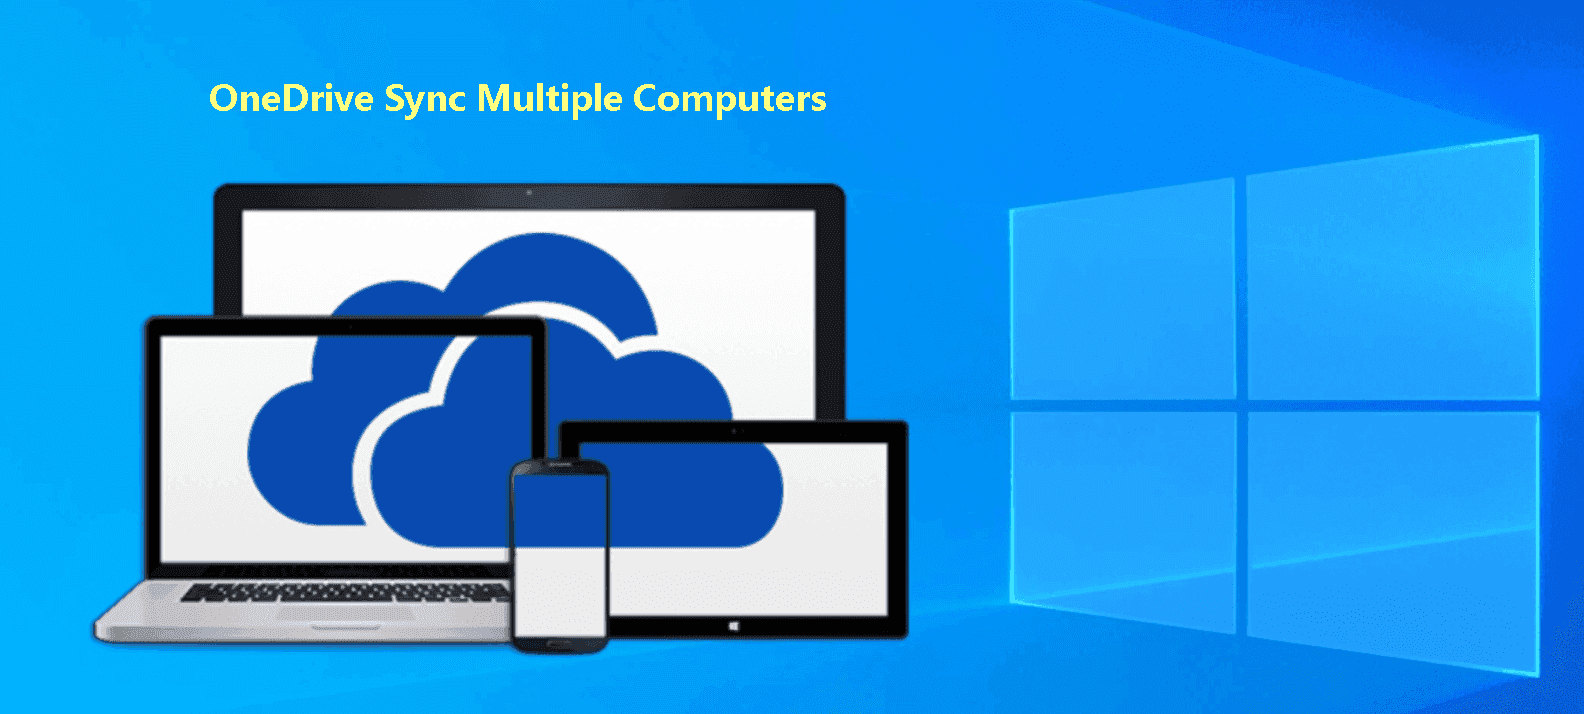 OneDrive Sync Multiple Computers